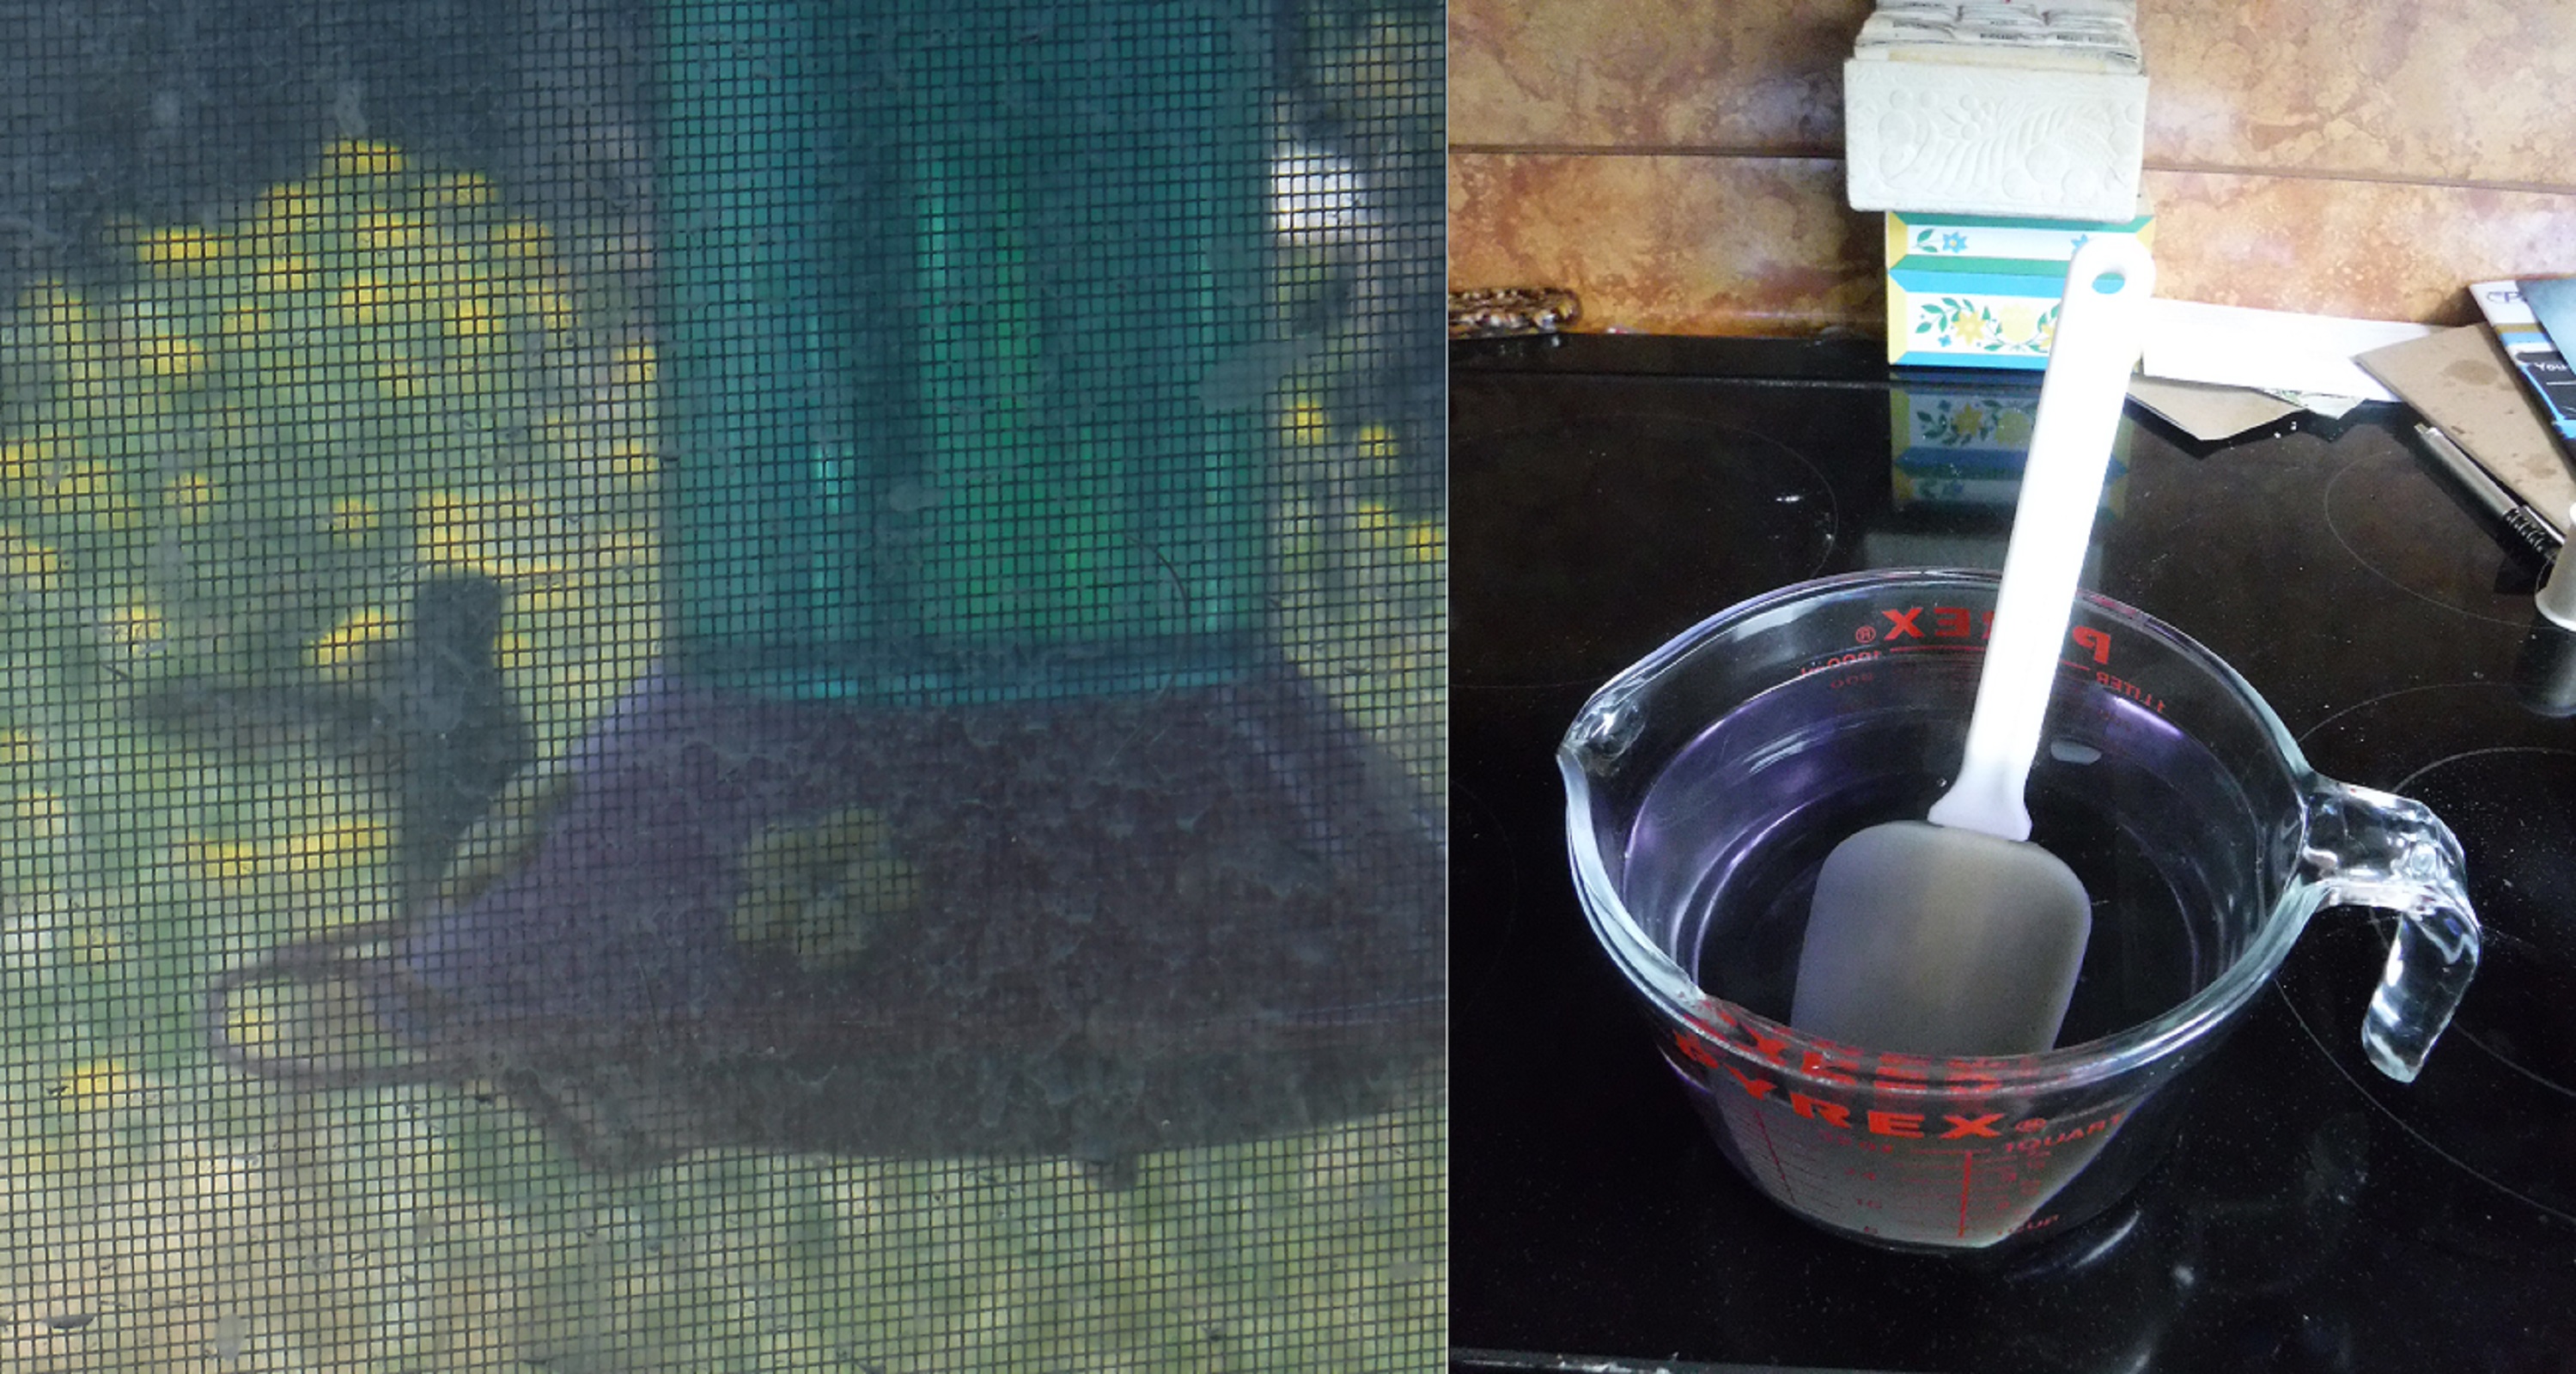 Photos I took today of hummingbird at the feeder and food I made for the other feeder